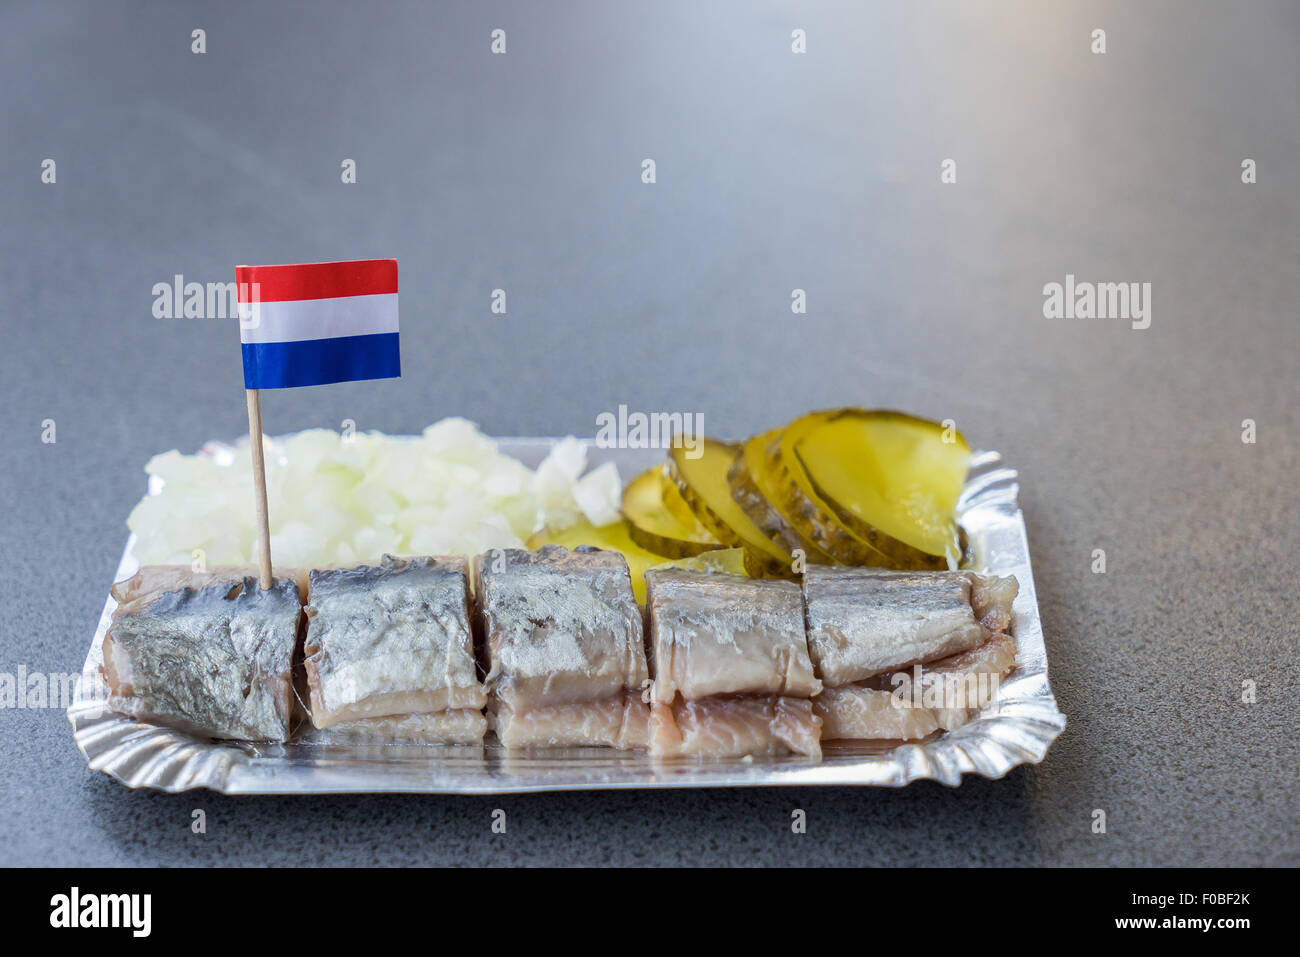 https://c8.alamy.com/comp/F0BF2K/a-dutch-herring-cut-up-into-slices-and-served-with-sliced-gherkin-F0BF2K.jpg